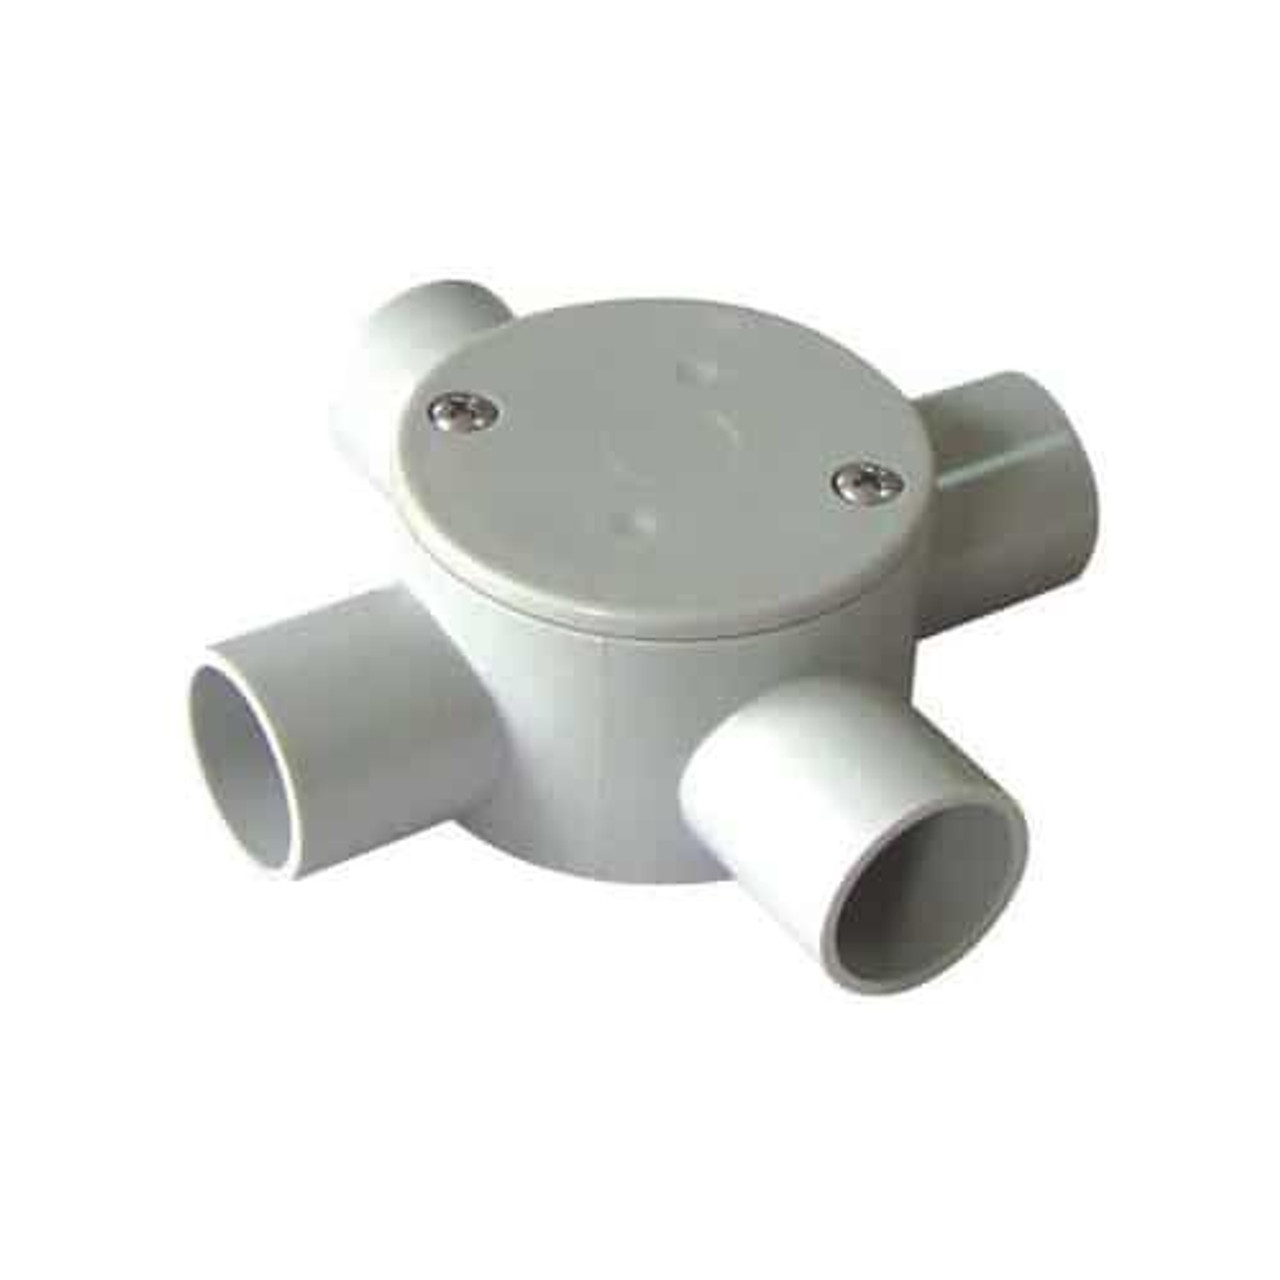 PVC RIGID JUNCTION BOX STANDARD WITH 4 x 20MM CONDUIT CONNECTIONS GREY